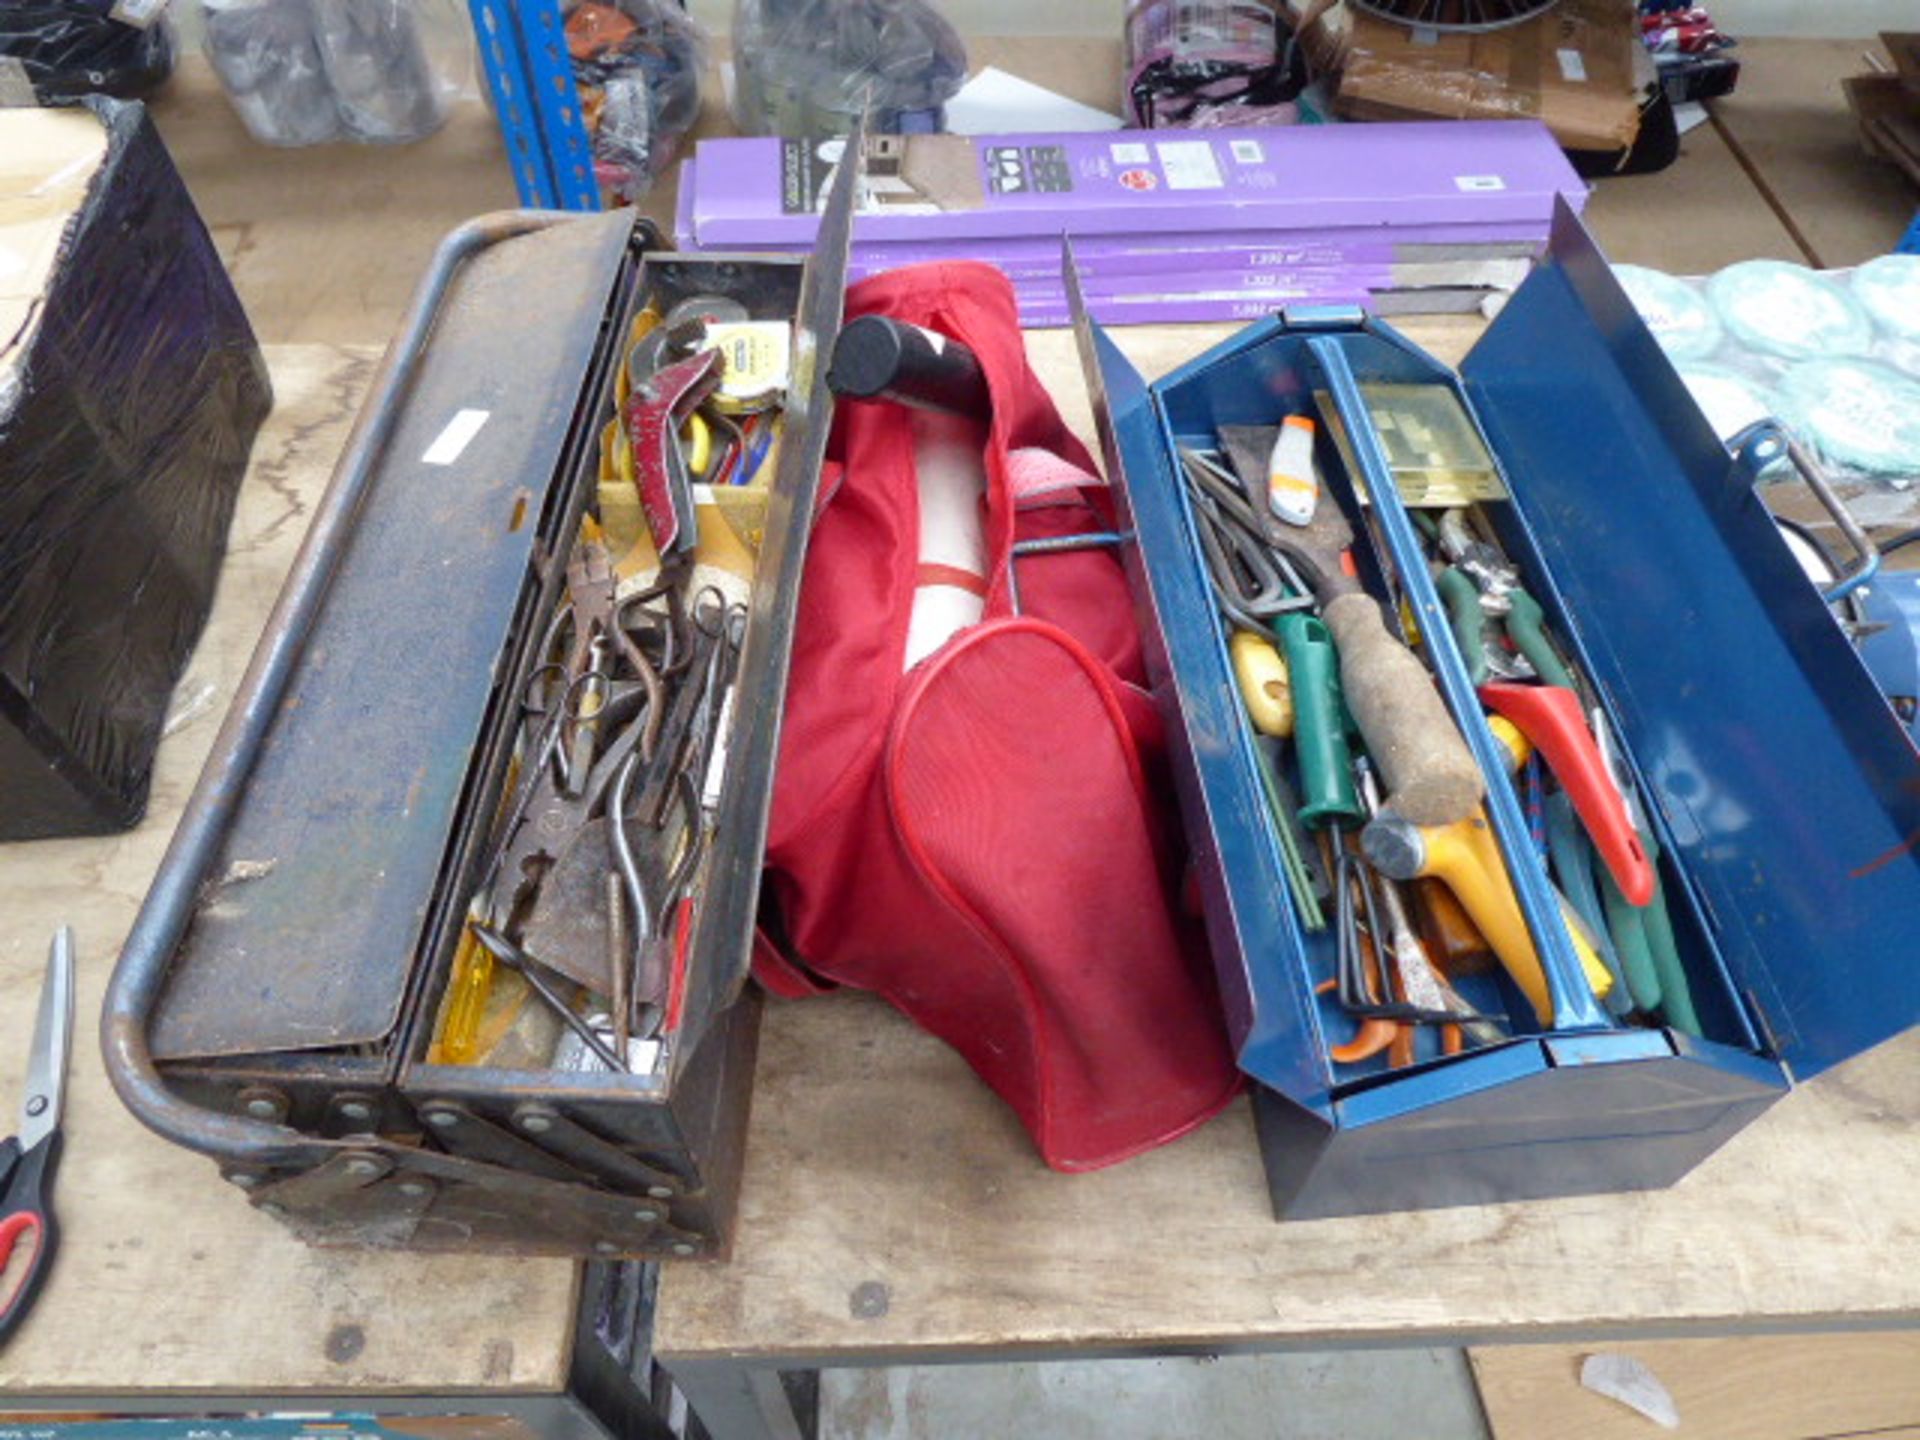 2 metal toolboxes and red bag containing various assorted tools